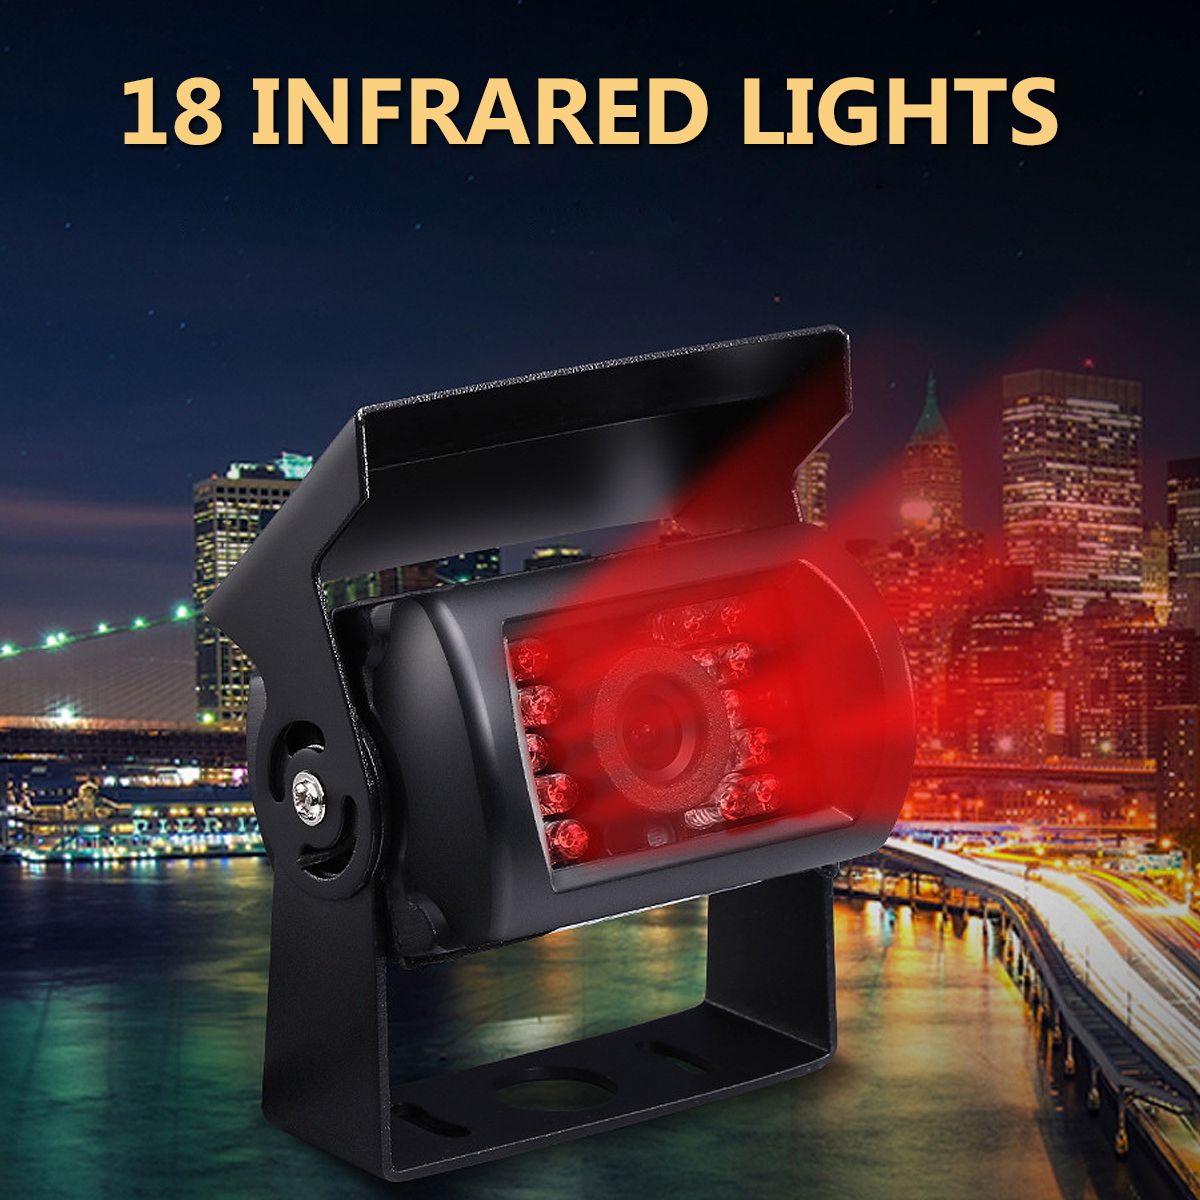 Waterproof-Shockproof-Car-Rear-View-Reversing-HD-Infrared-Lights-Night-Vision-Camera-With-AV-Cable-1342397